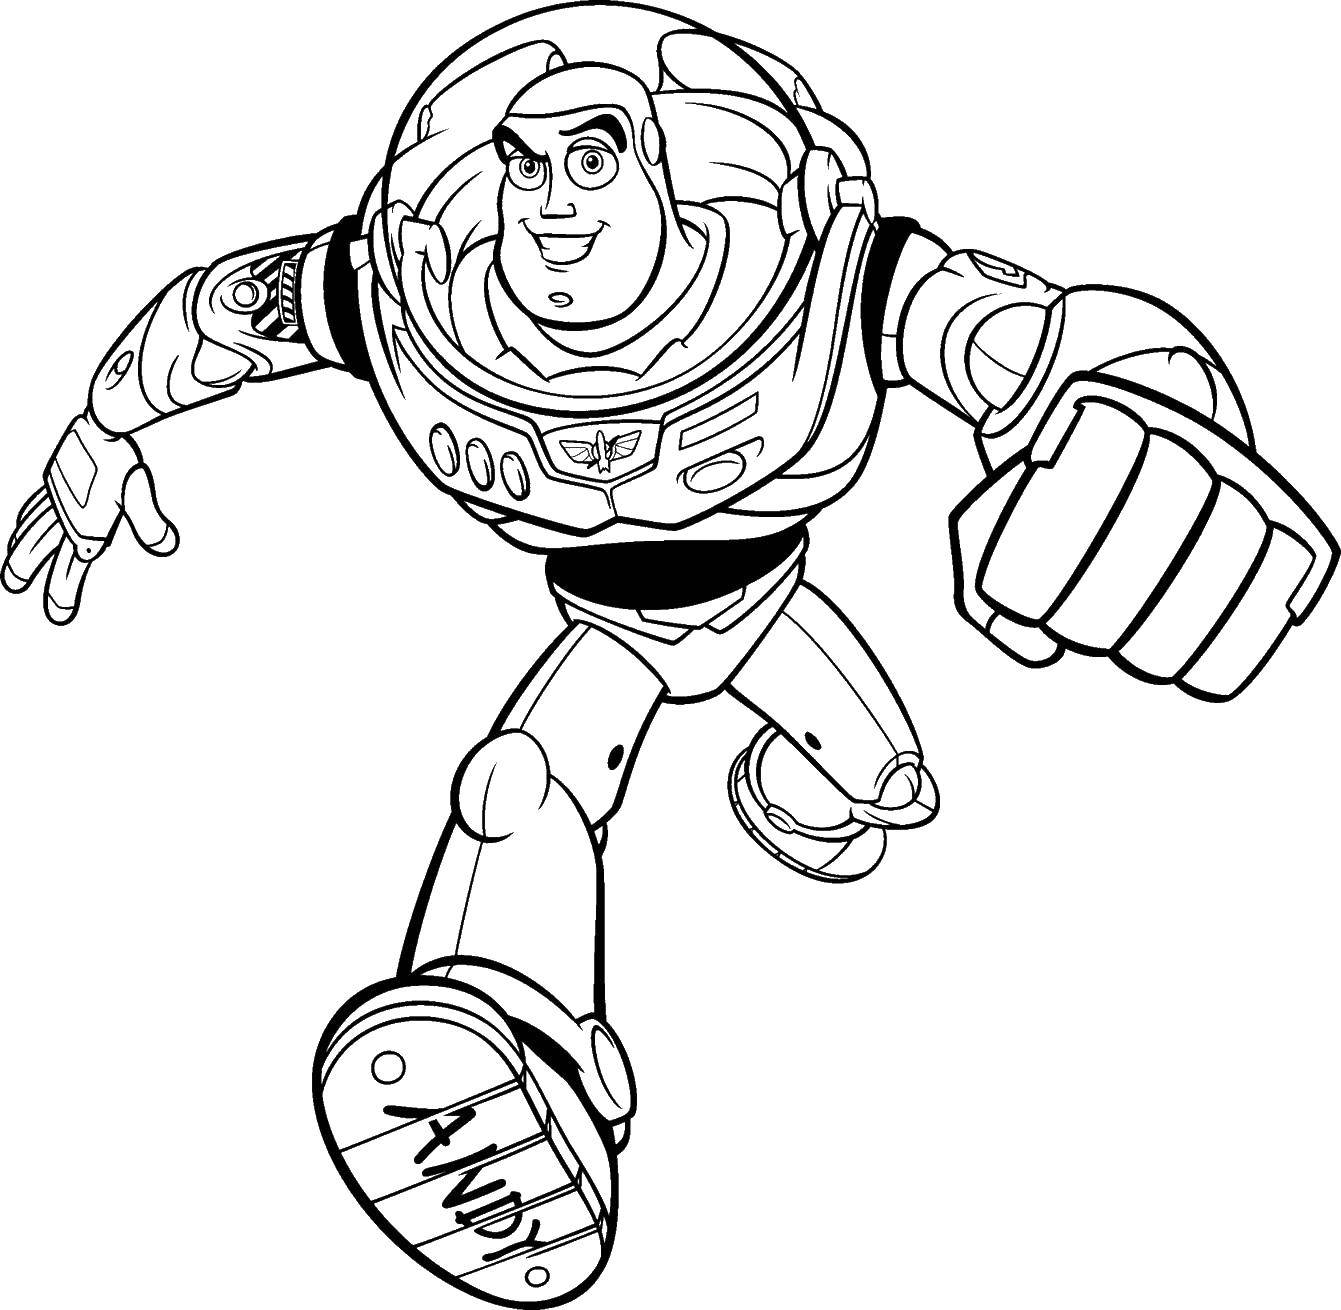 Coloring Buzz Lightyear. Category For boys . Tags:  buzz Lightyear.